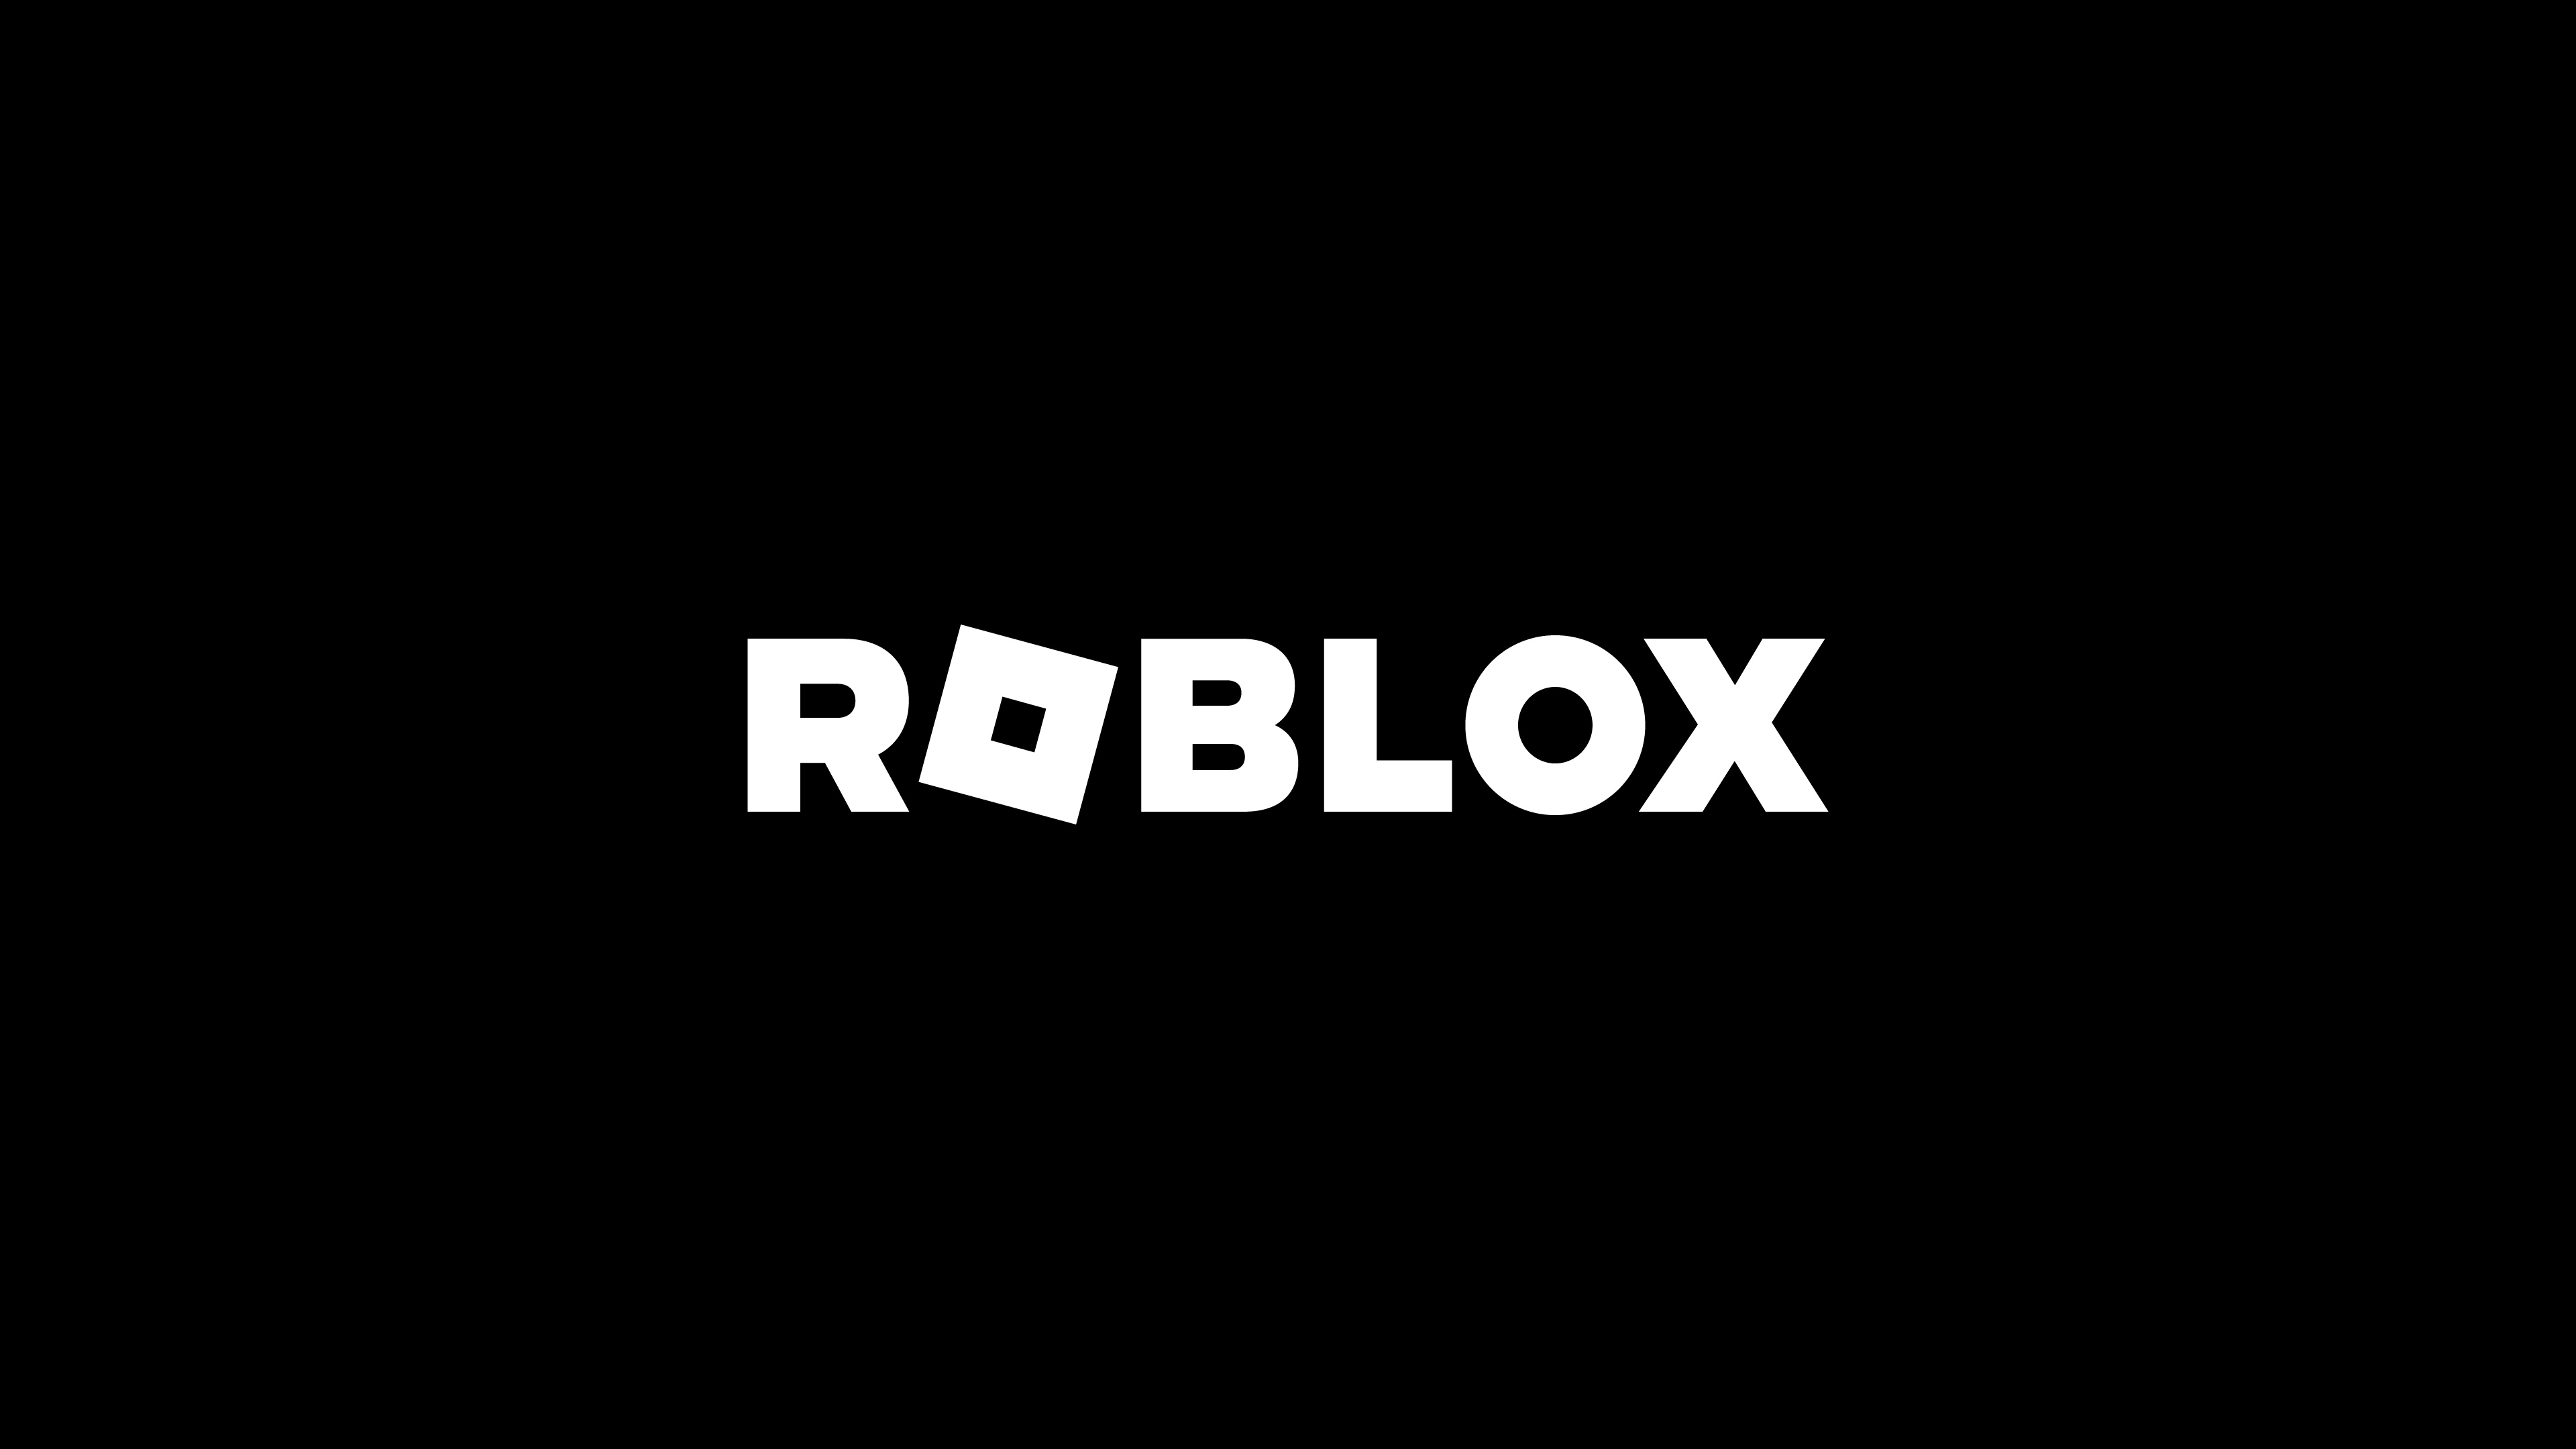 Roblox Head Said They're Not Exploiting Child Labor, They're Creating ...